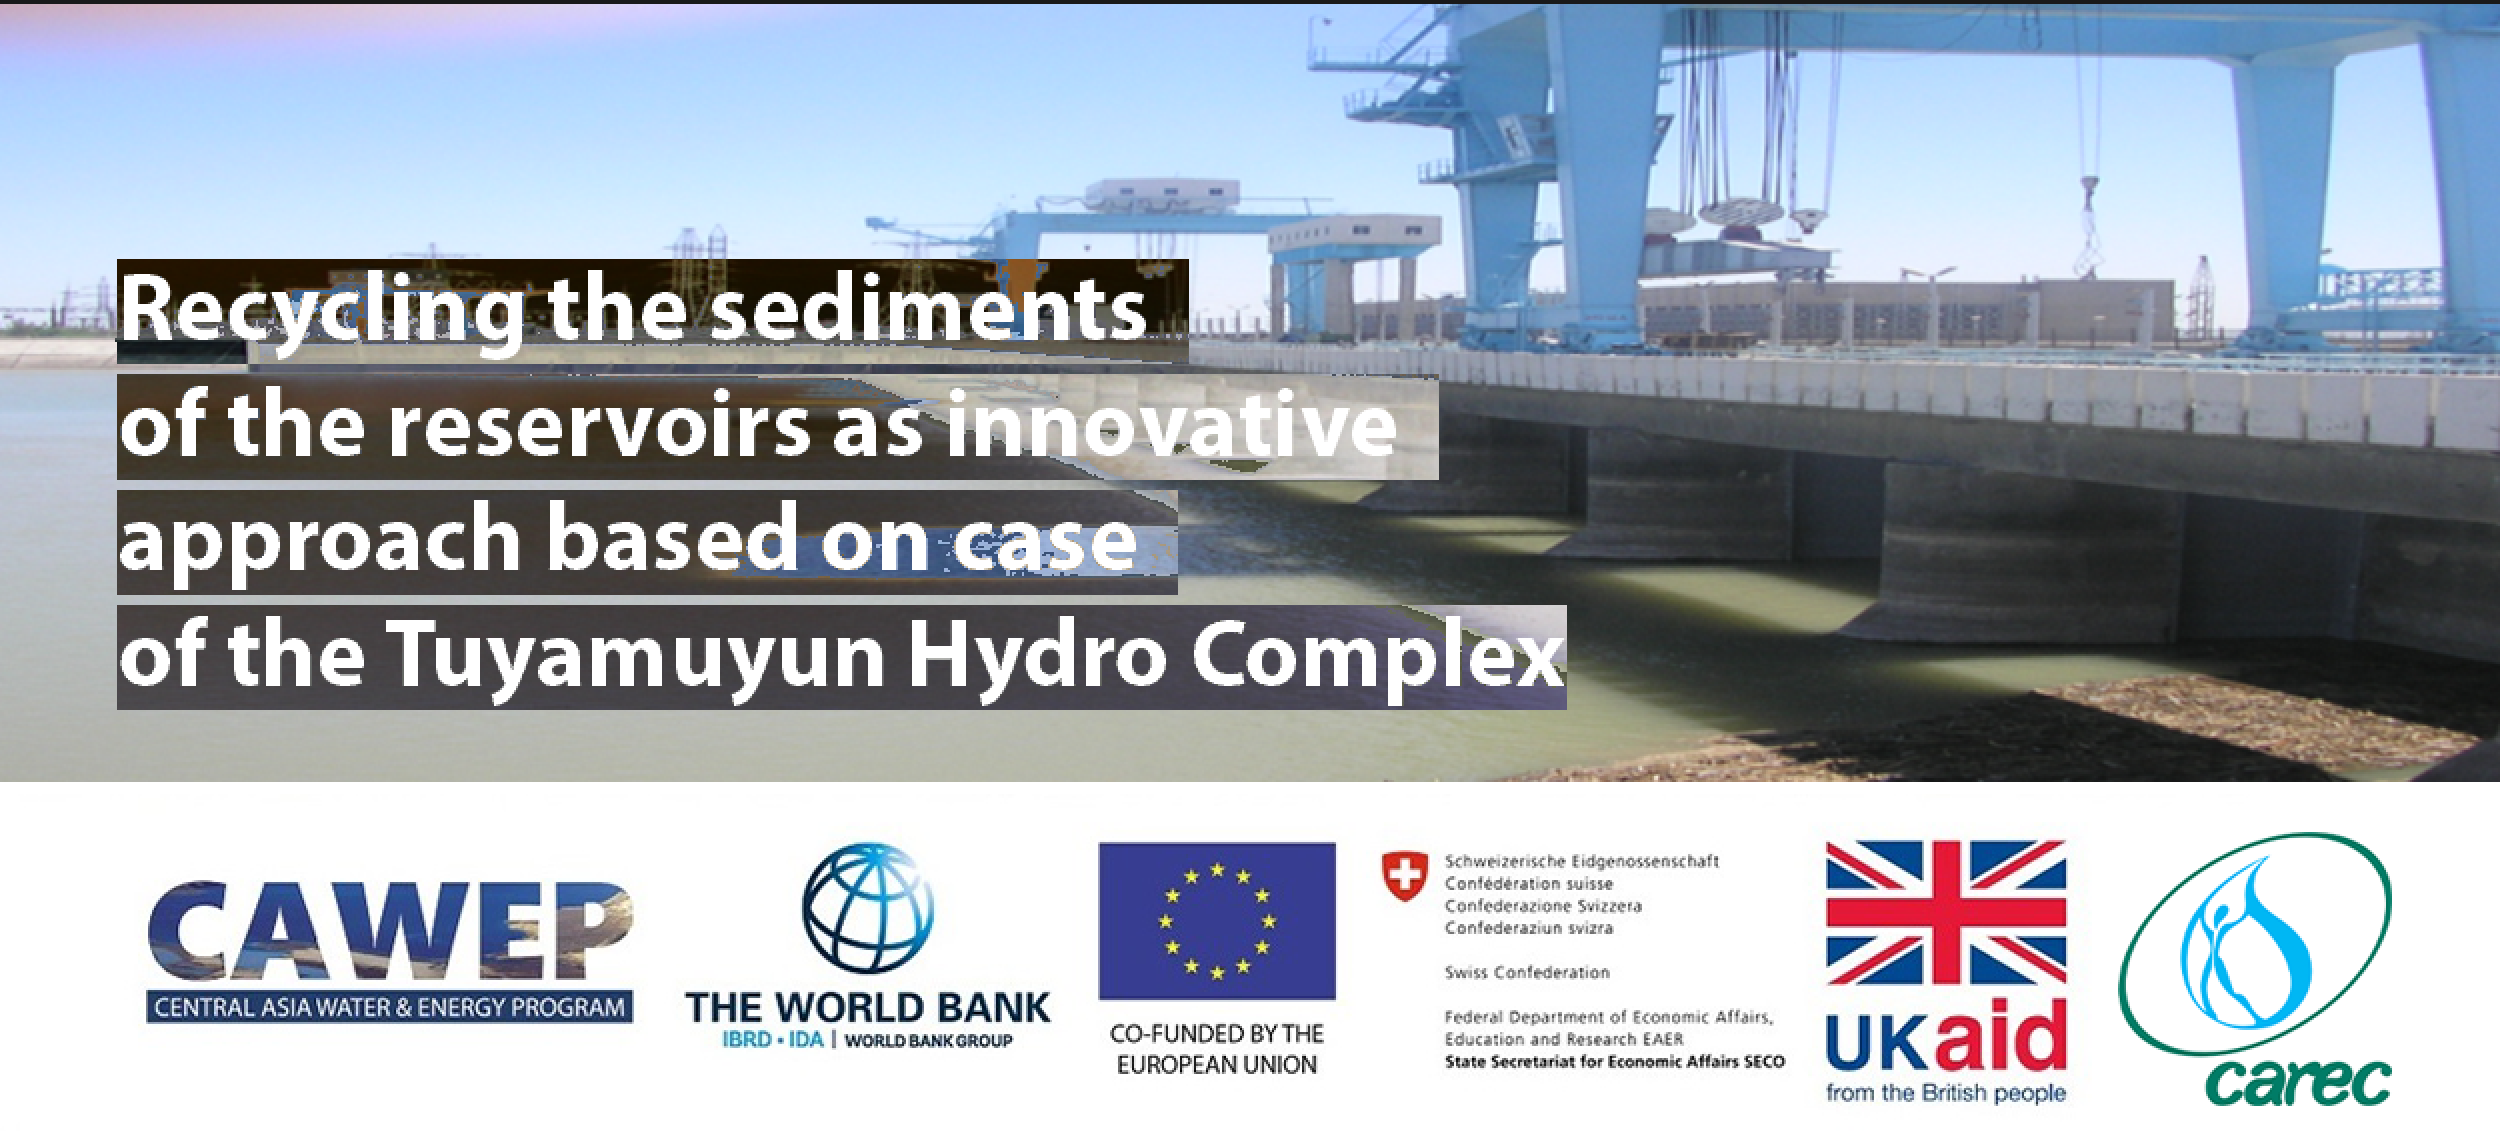 Recycling the sediments of the reservoirs as innovative approach based on case of the Tuyamuyun Hydro Complex ll2